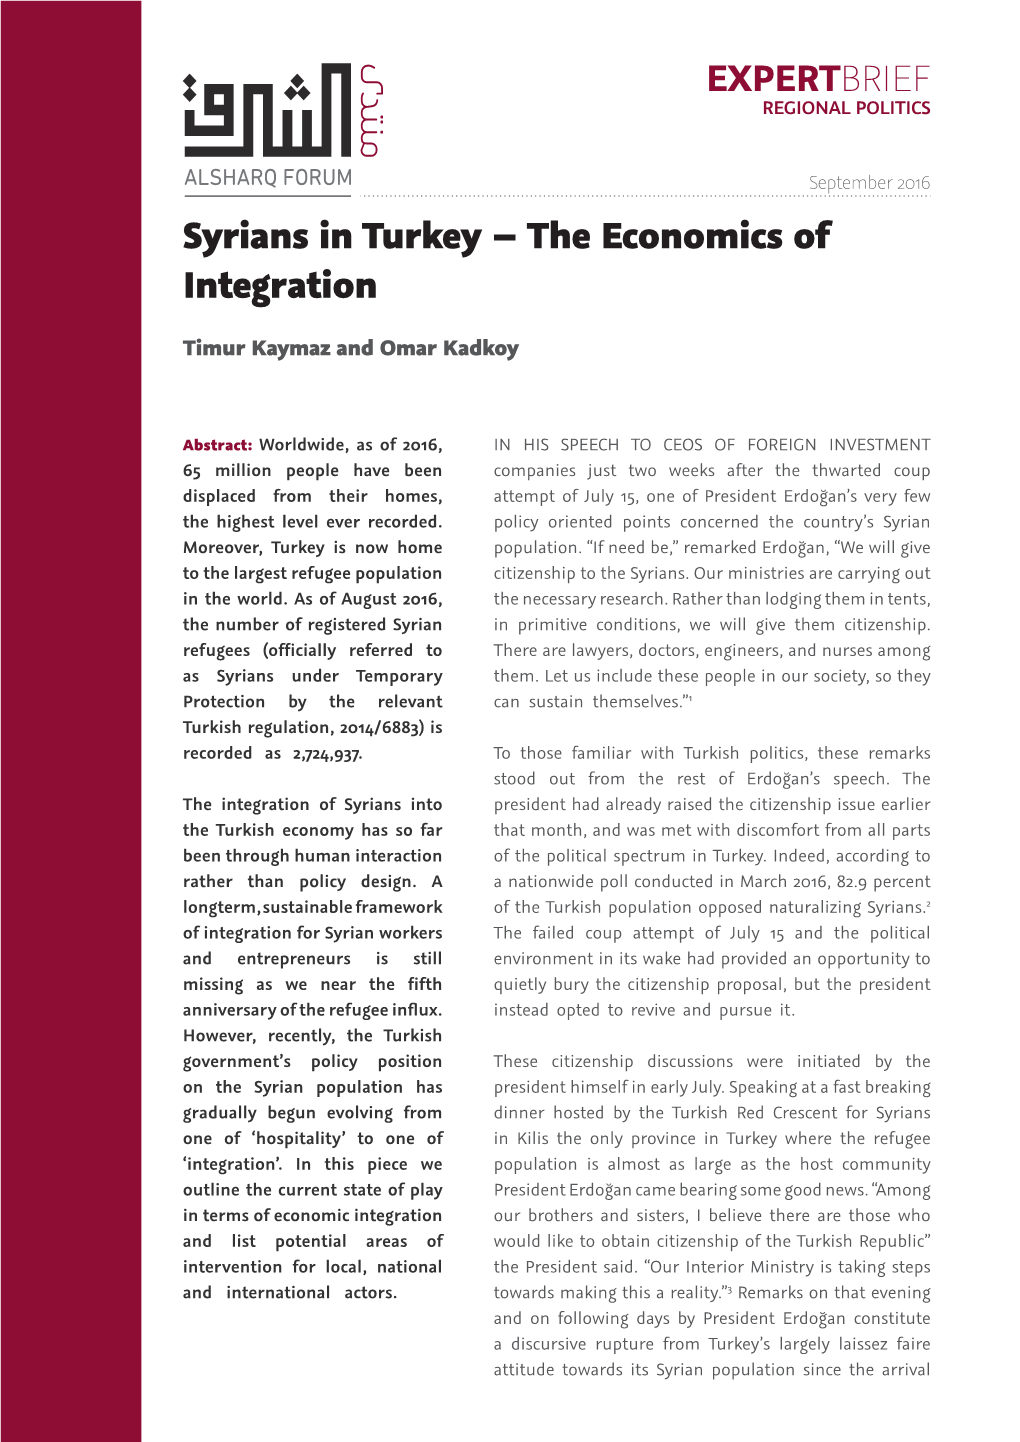 Syrians in Turkey – the Economics of Integration